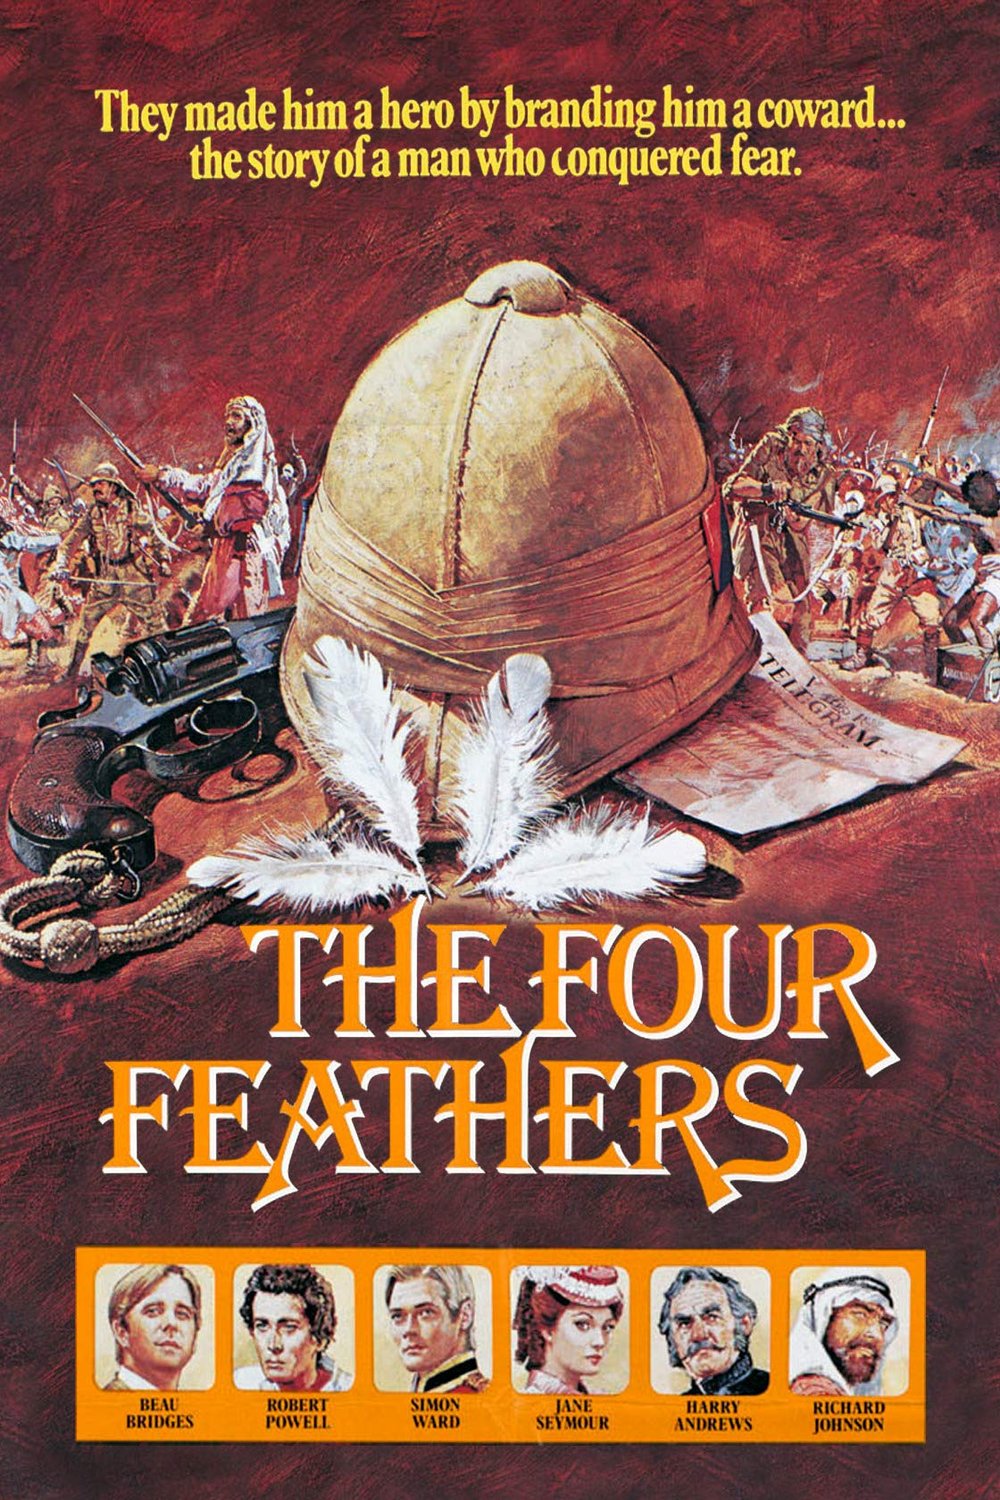 Poster of the movie The Four Feathers